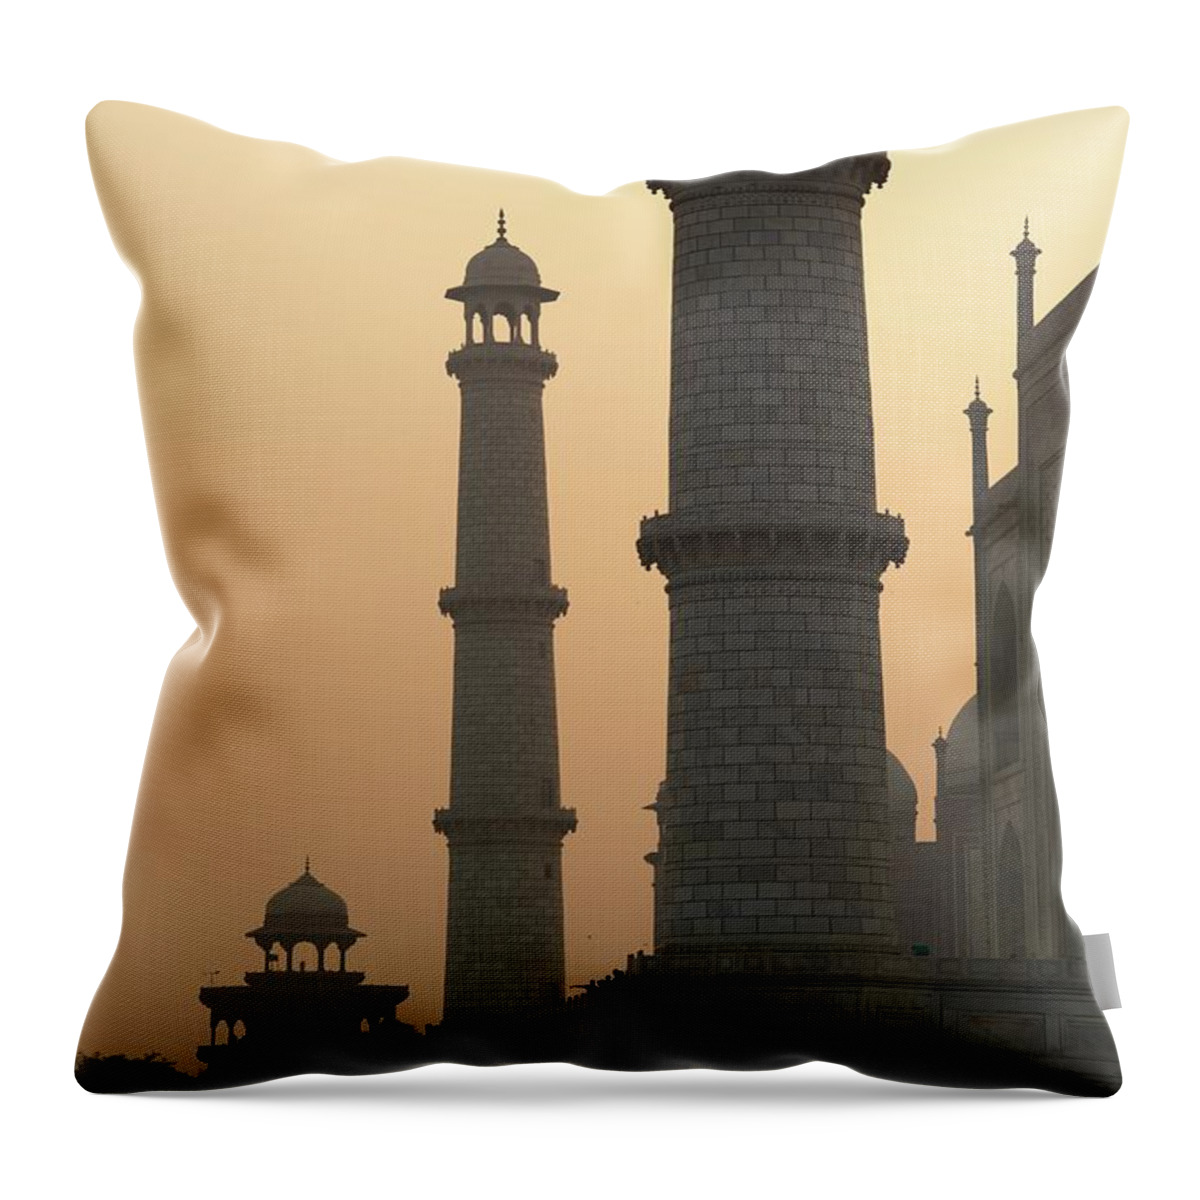 Clear Sky Throw Pillow featuring the photograph Taj Mahal In The Early Morning by Dominik Eckelt